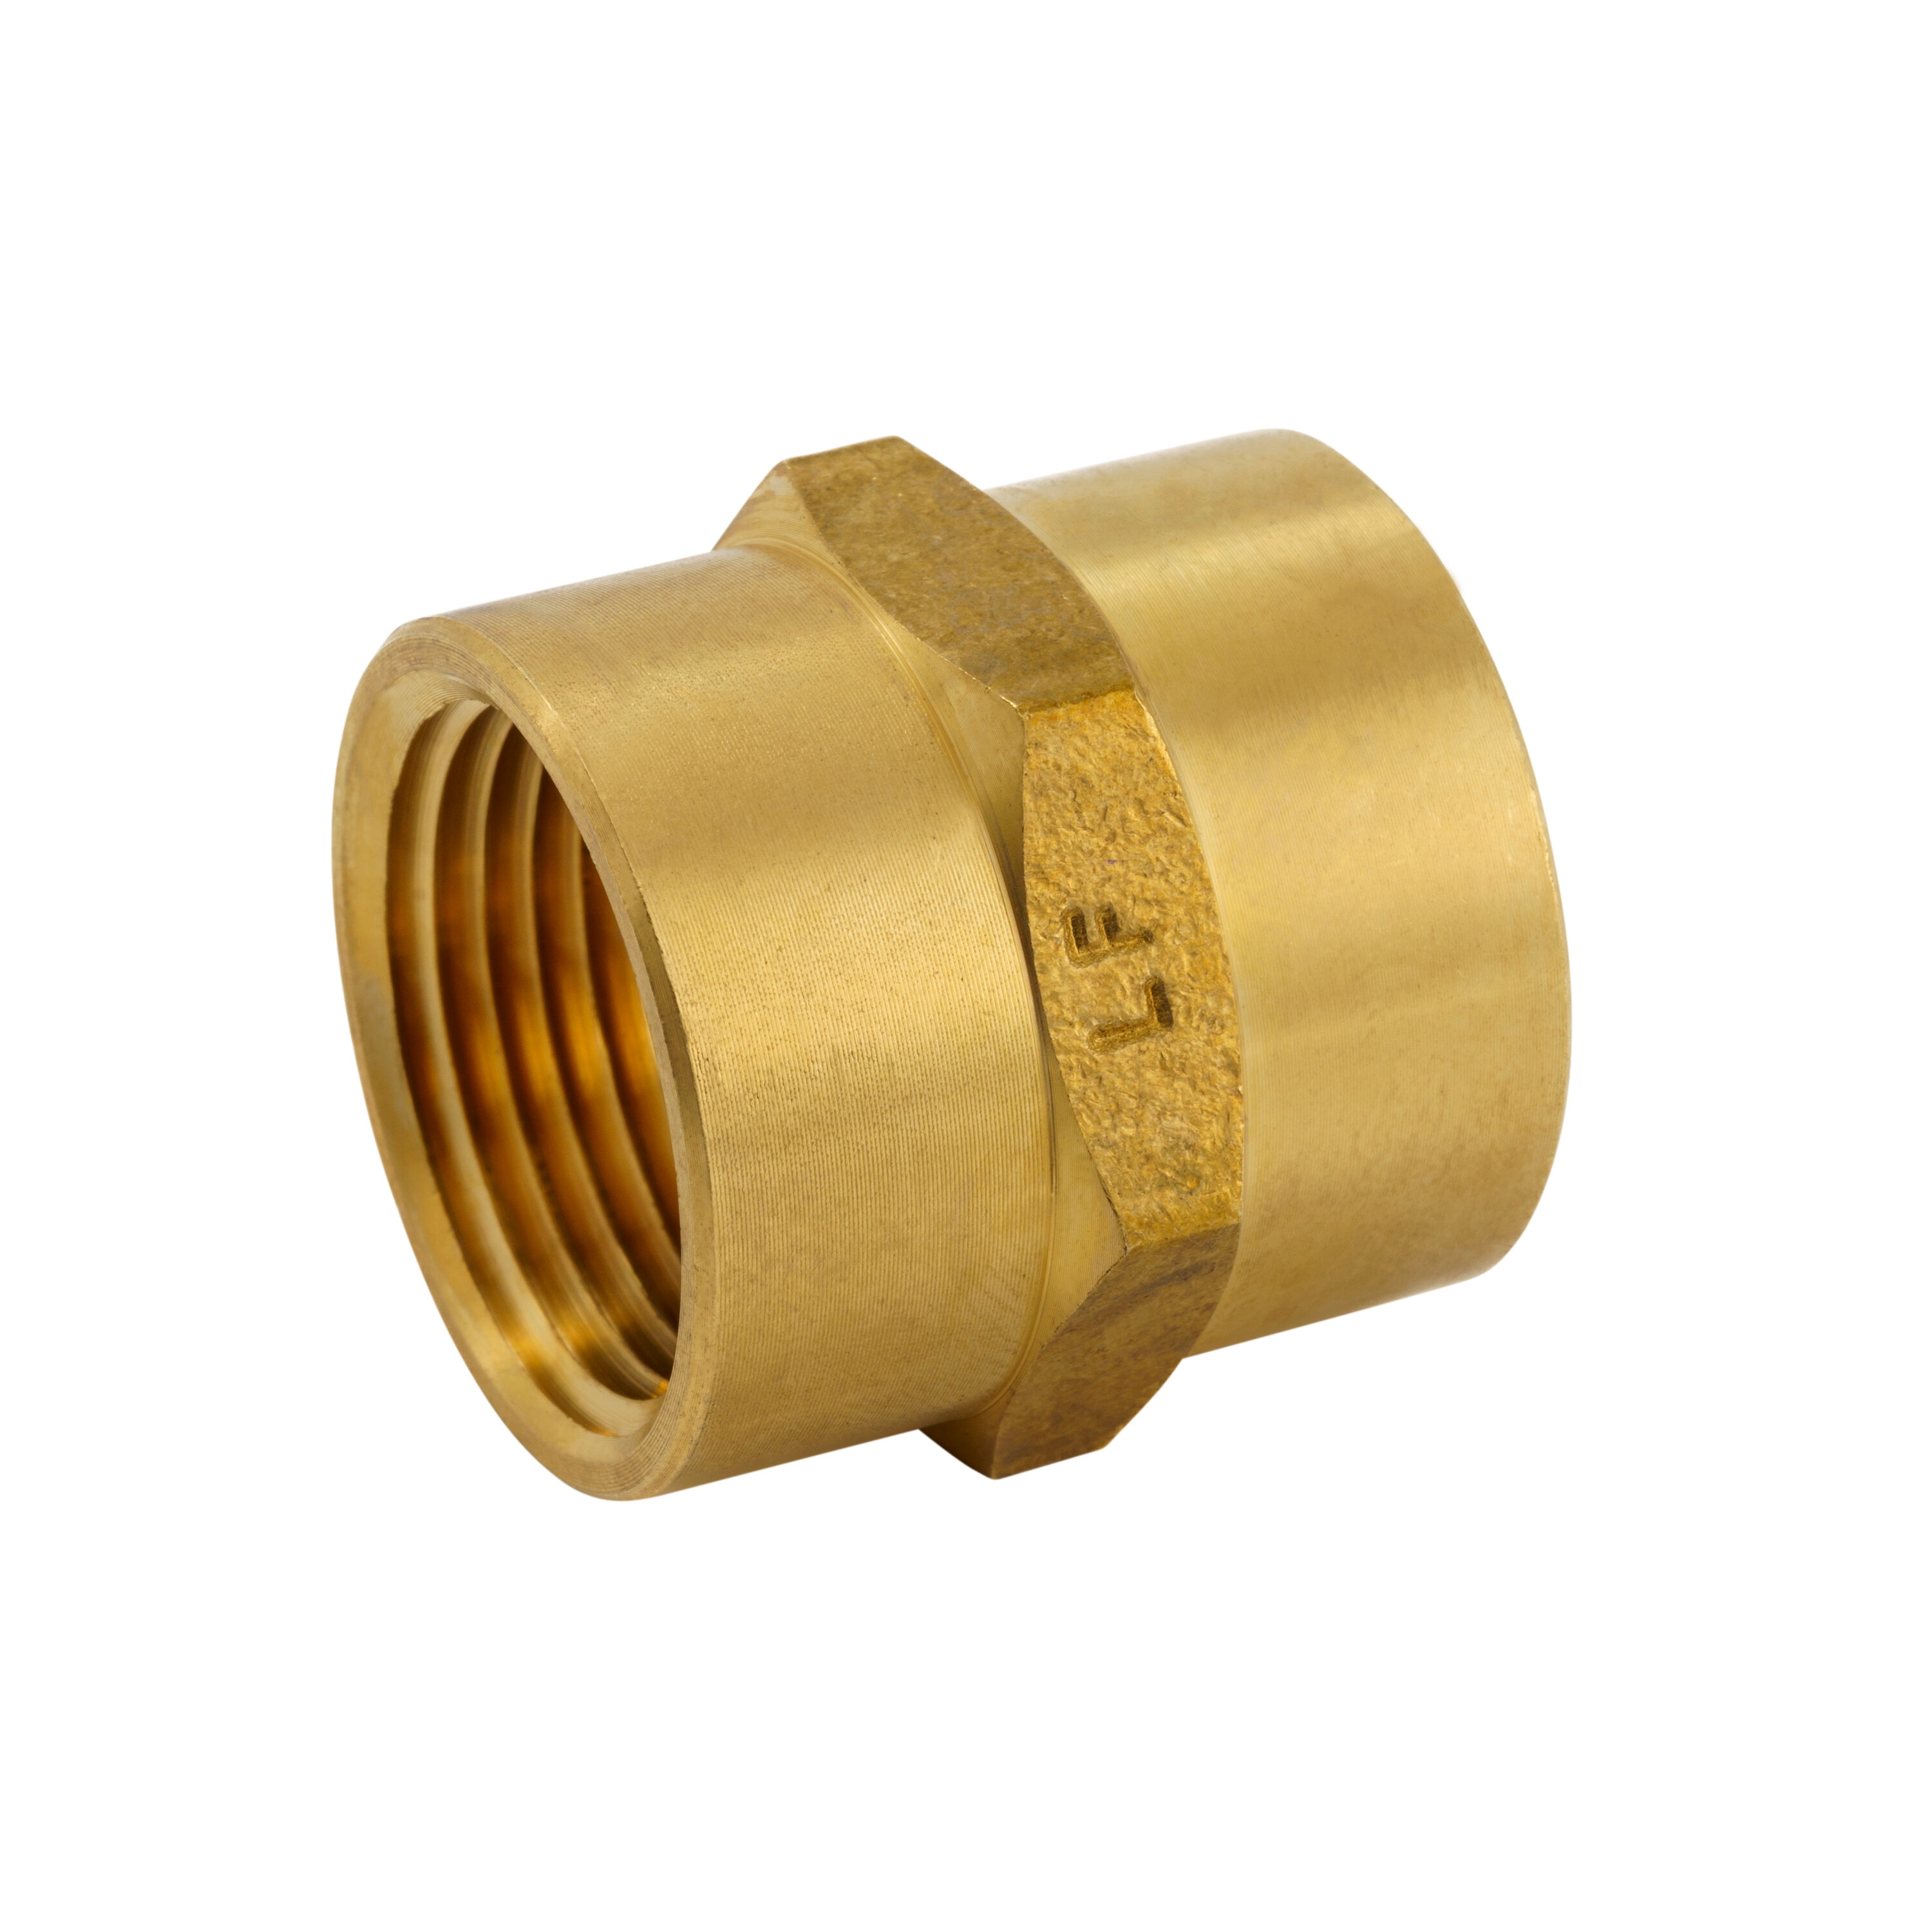 Proline Series 3/4-in x 3/4-in Threaded Coupling Fitting in the Brass  Fittings department at